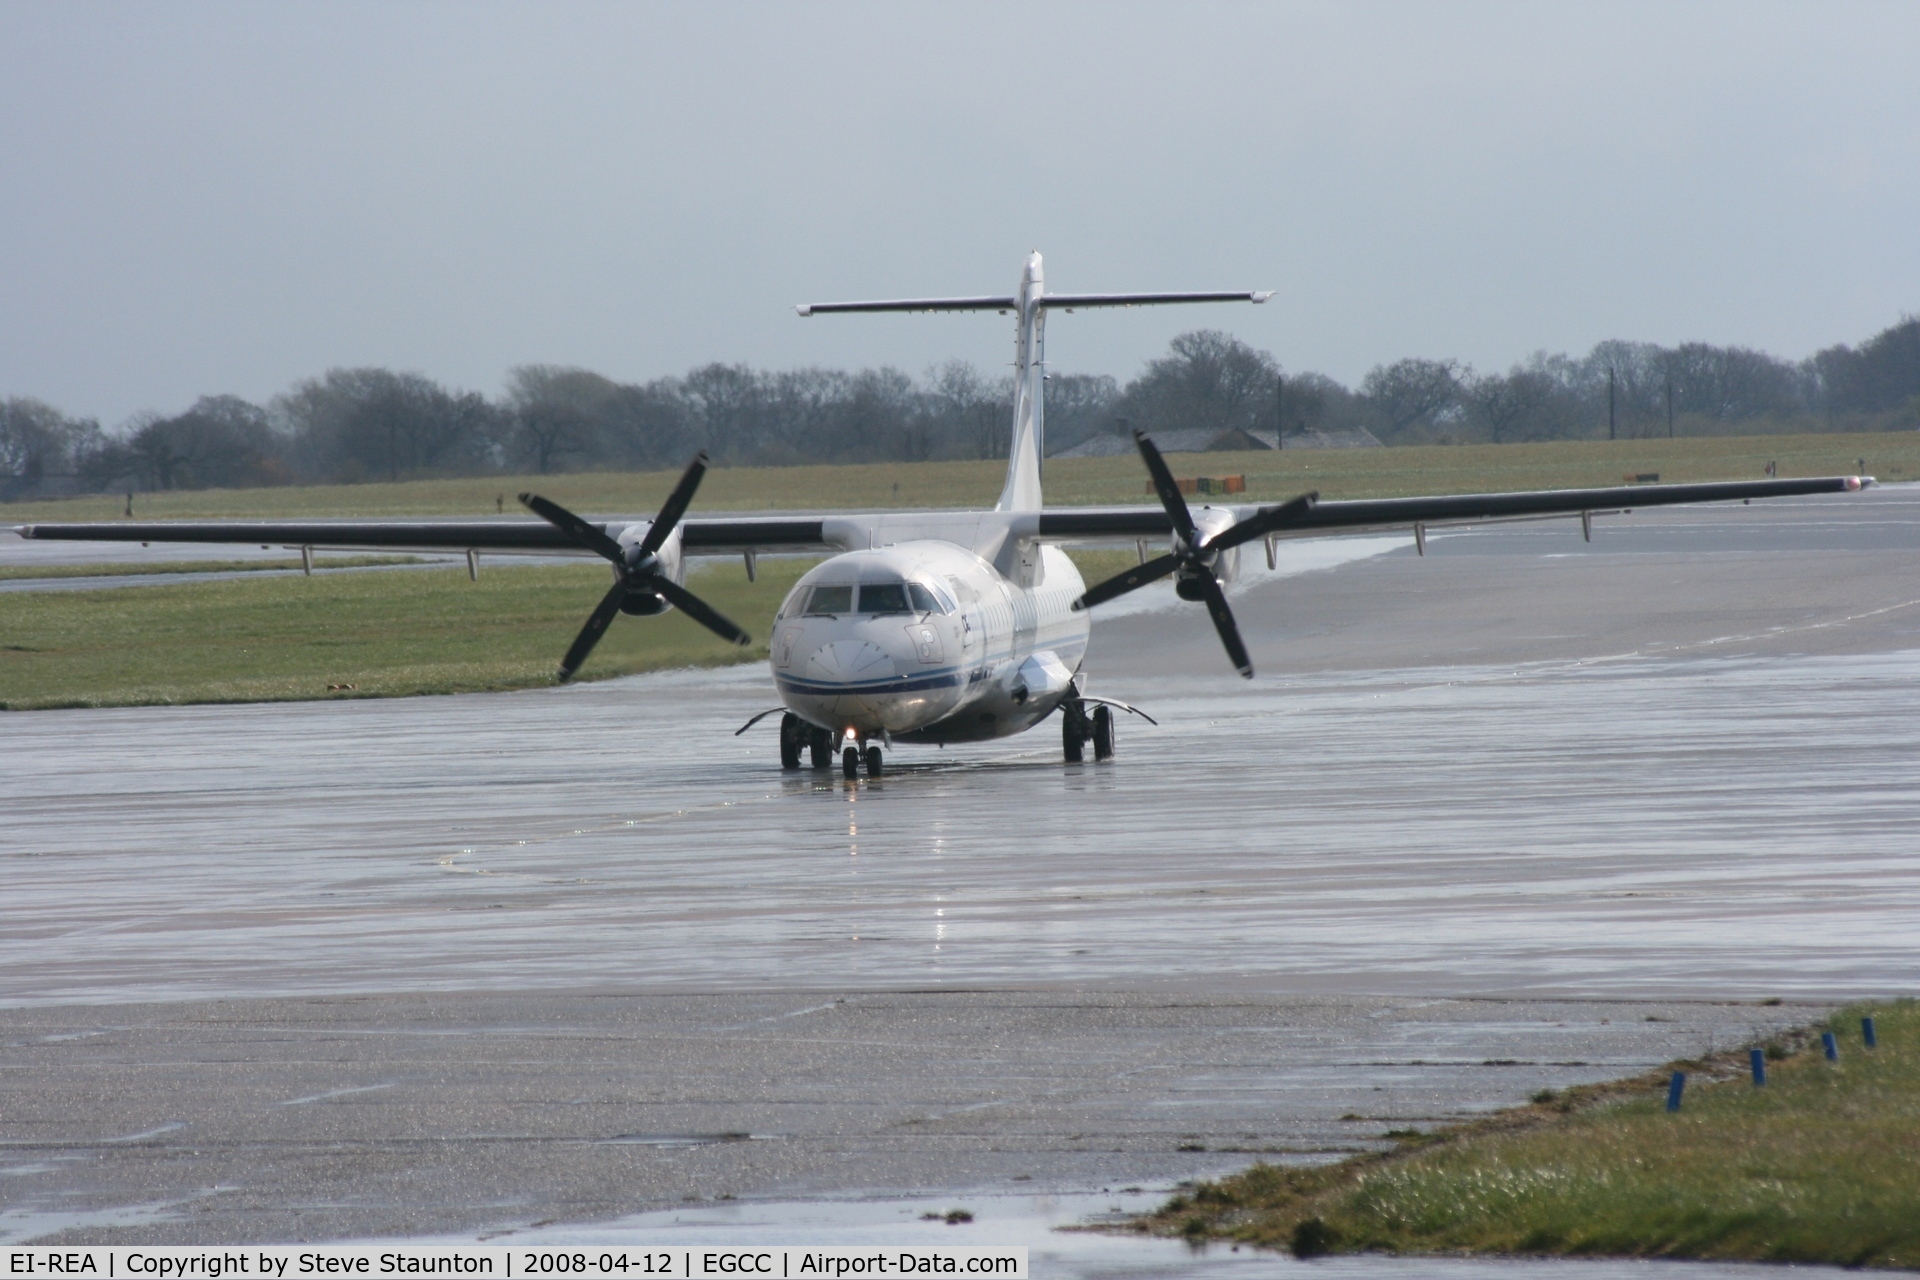 EI-REA, 1995 ATR 72-202 C/N 441, Taken at Manchester Airport on a typical showery April day